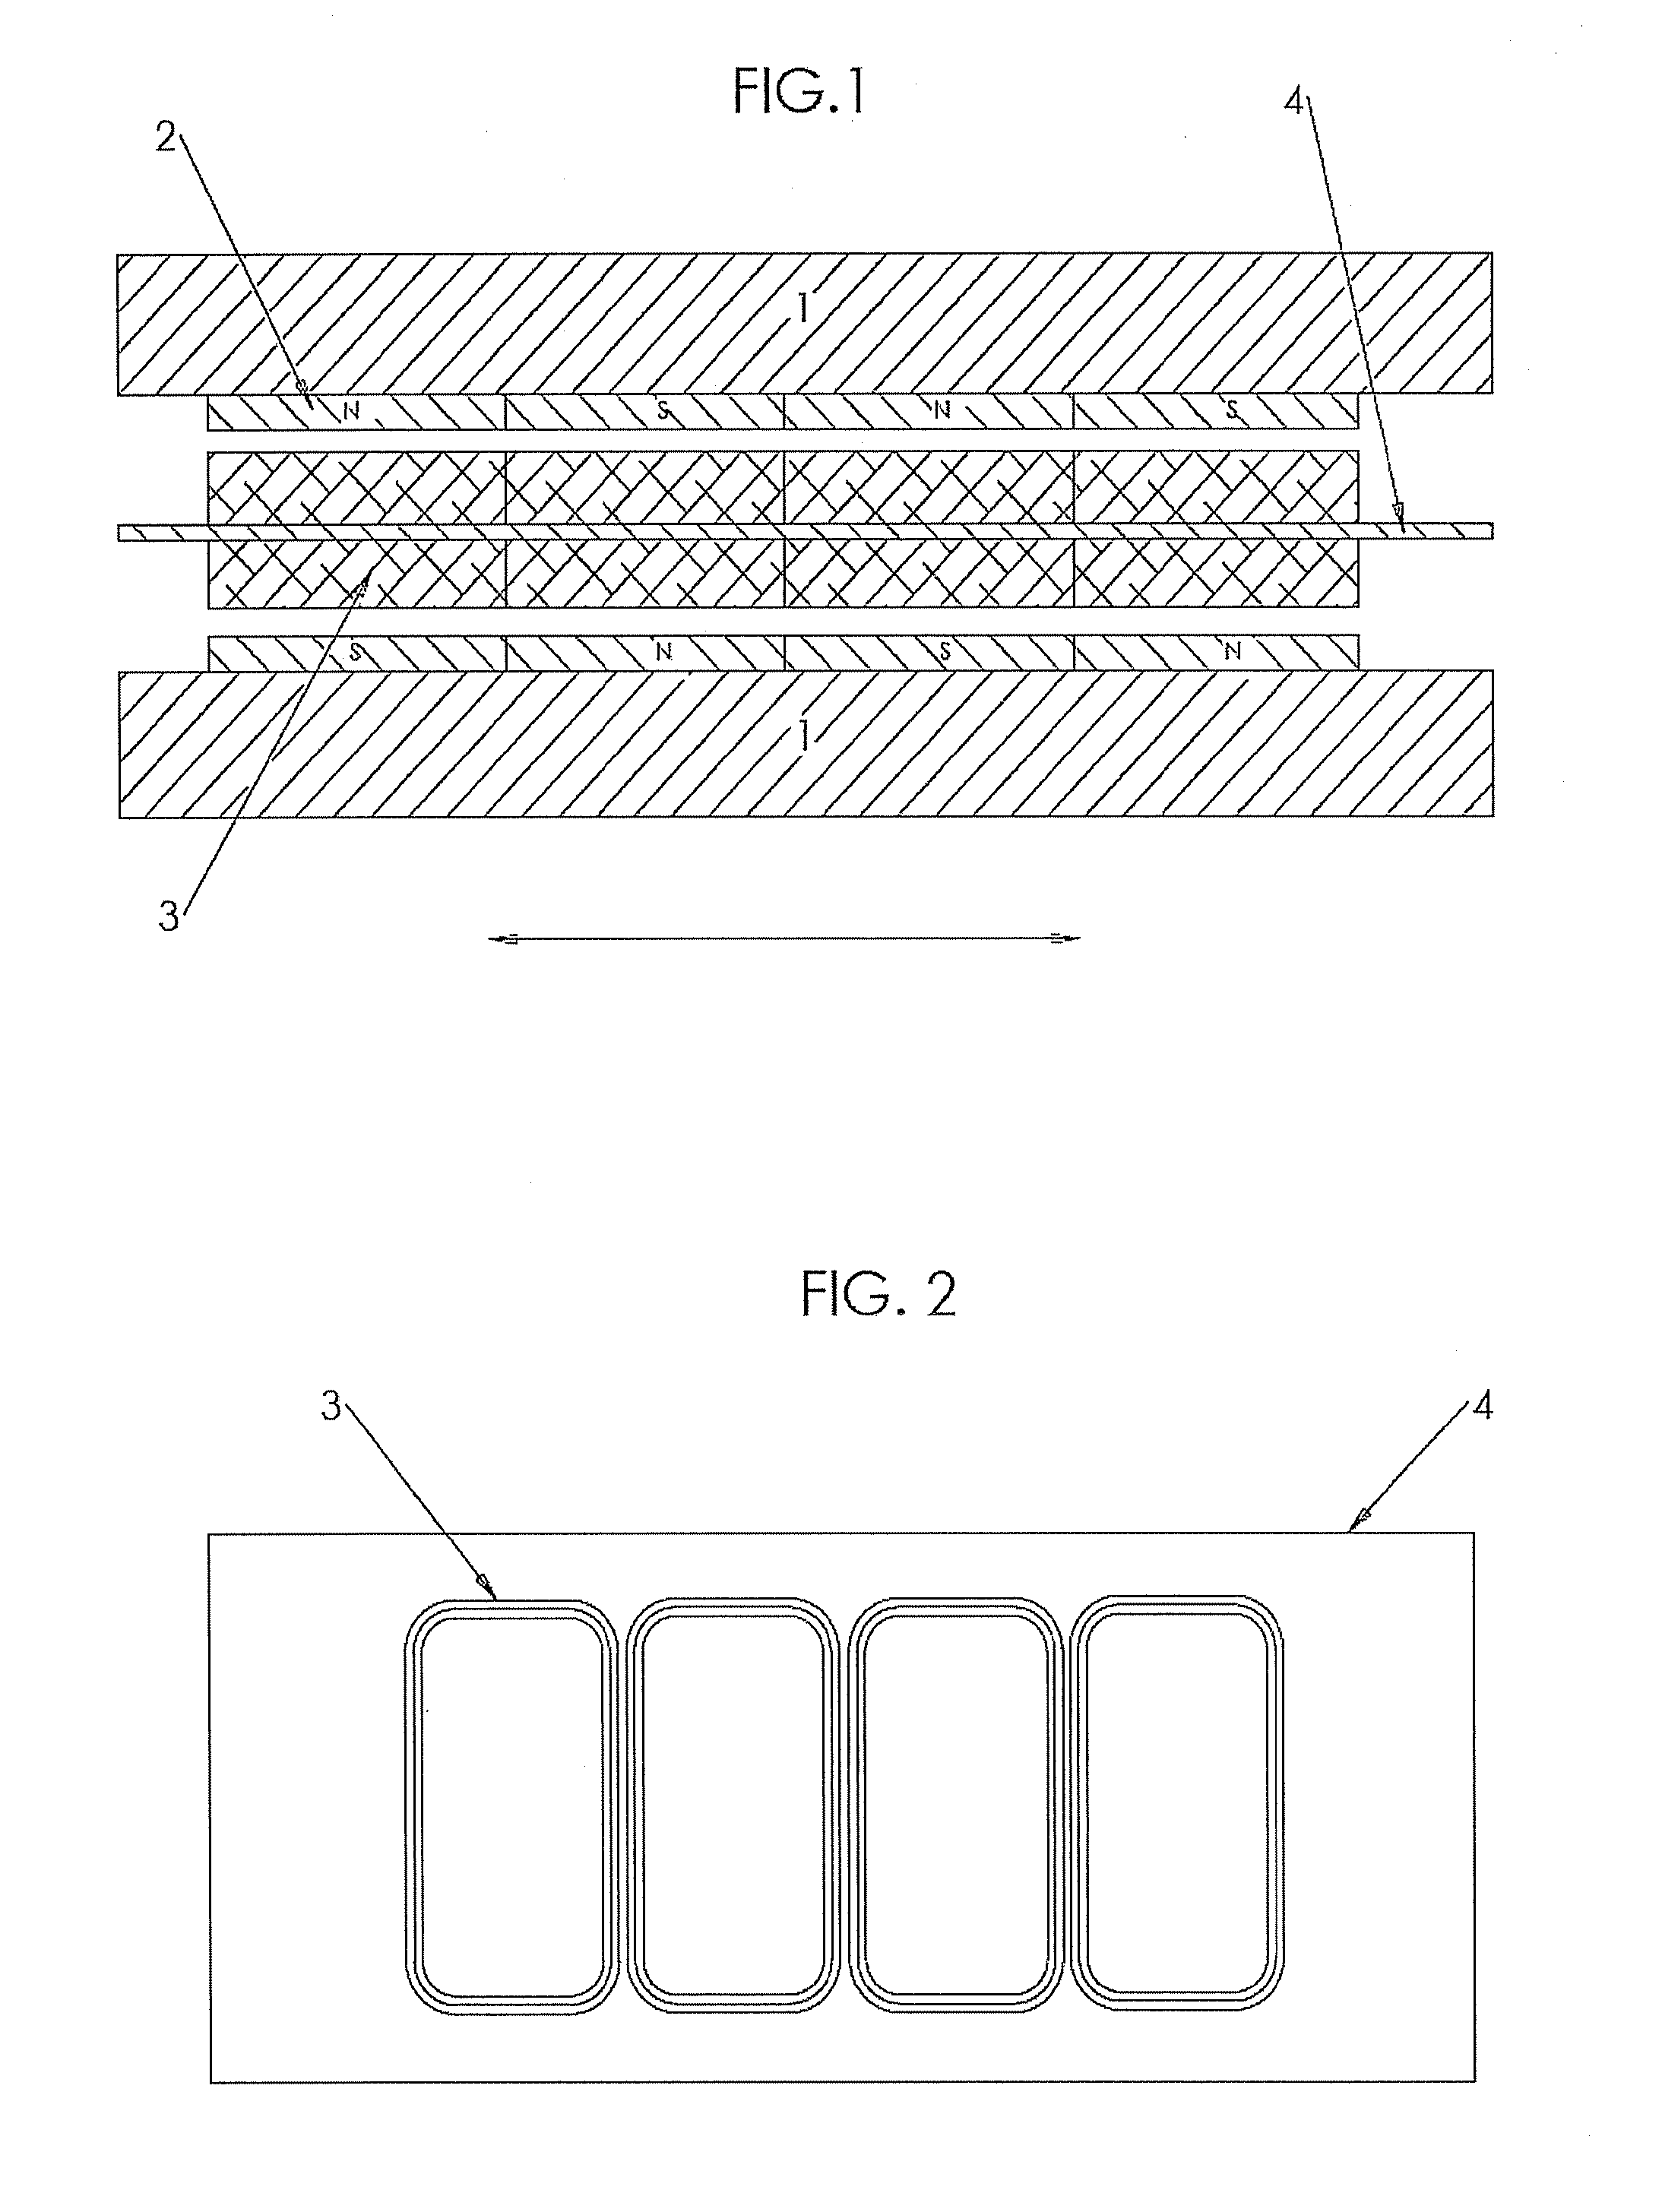 Electromagnetic load device for an apparatus for physical exercise, and apparatus provided with said device